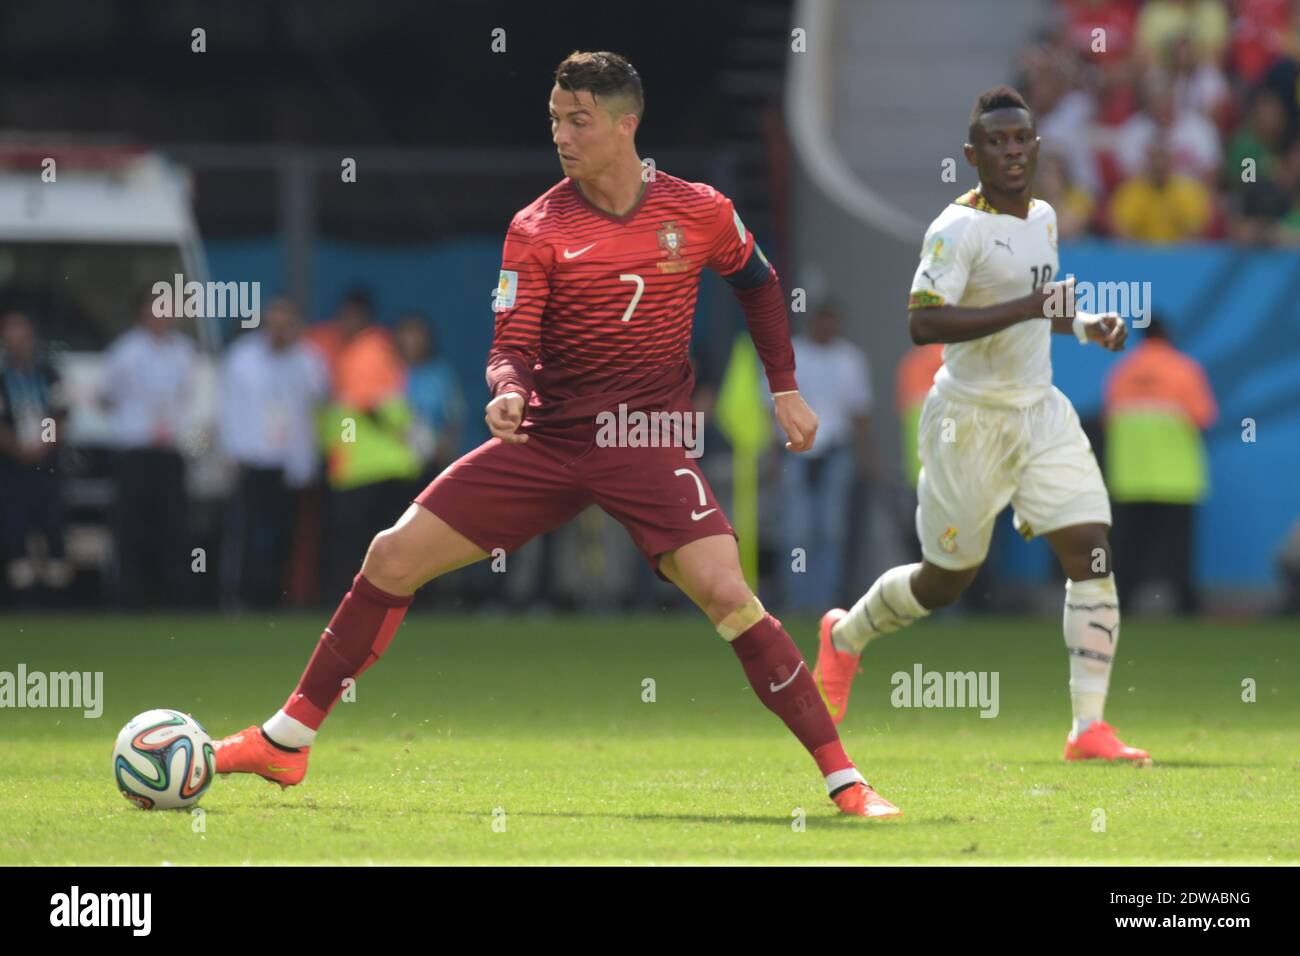 Portugal's Cristiano Ronaldo during Soccer World Cup 2014 First round Group G match Ghana v Portugal at National Stadium, Brasilia, Brazil on June 26, 2014. Portugal won 2-1. Photo by Henri Szwarc/ABACAPRESS.COM Stock Photo